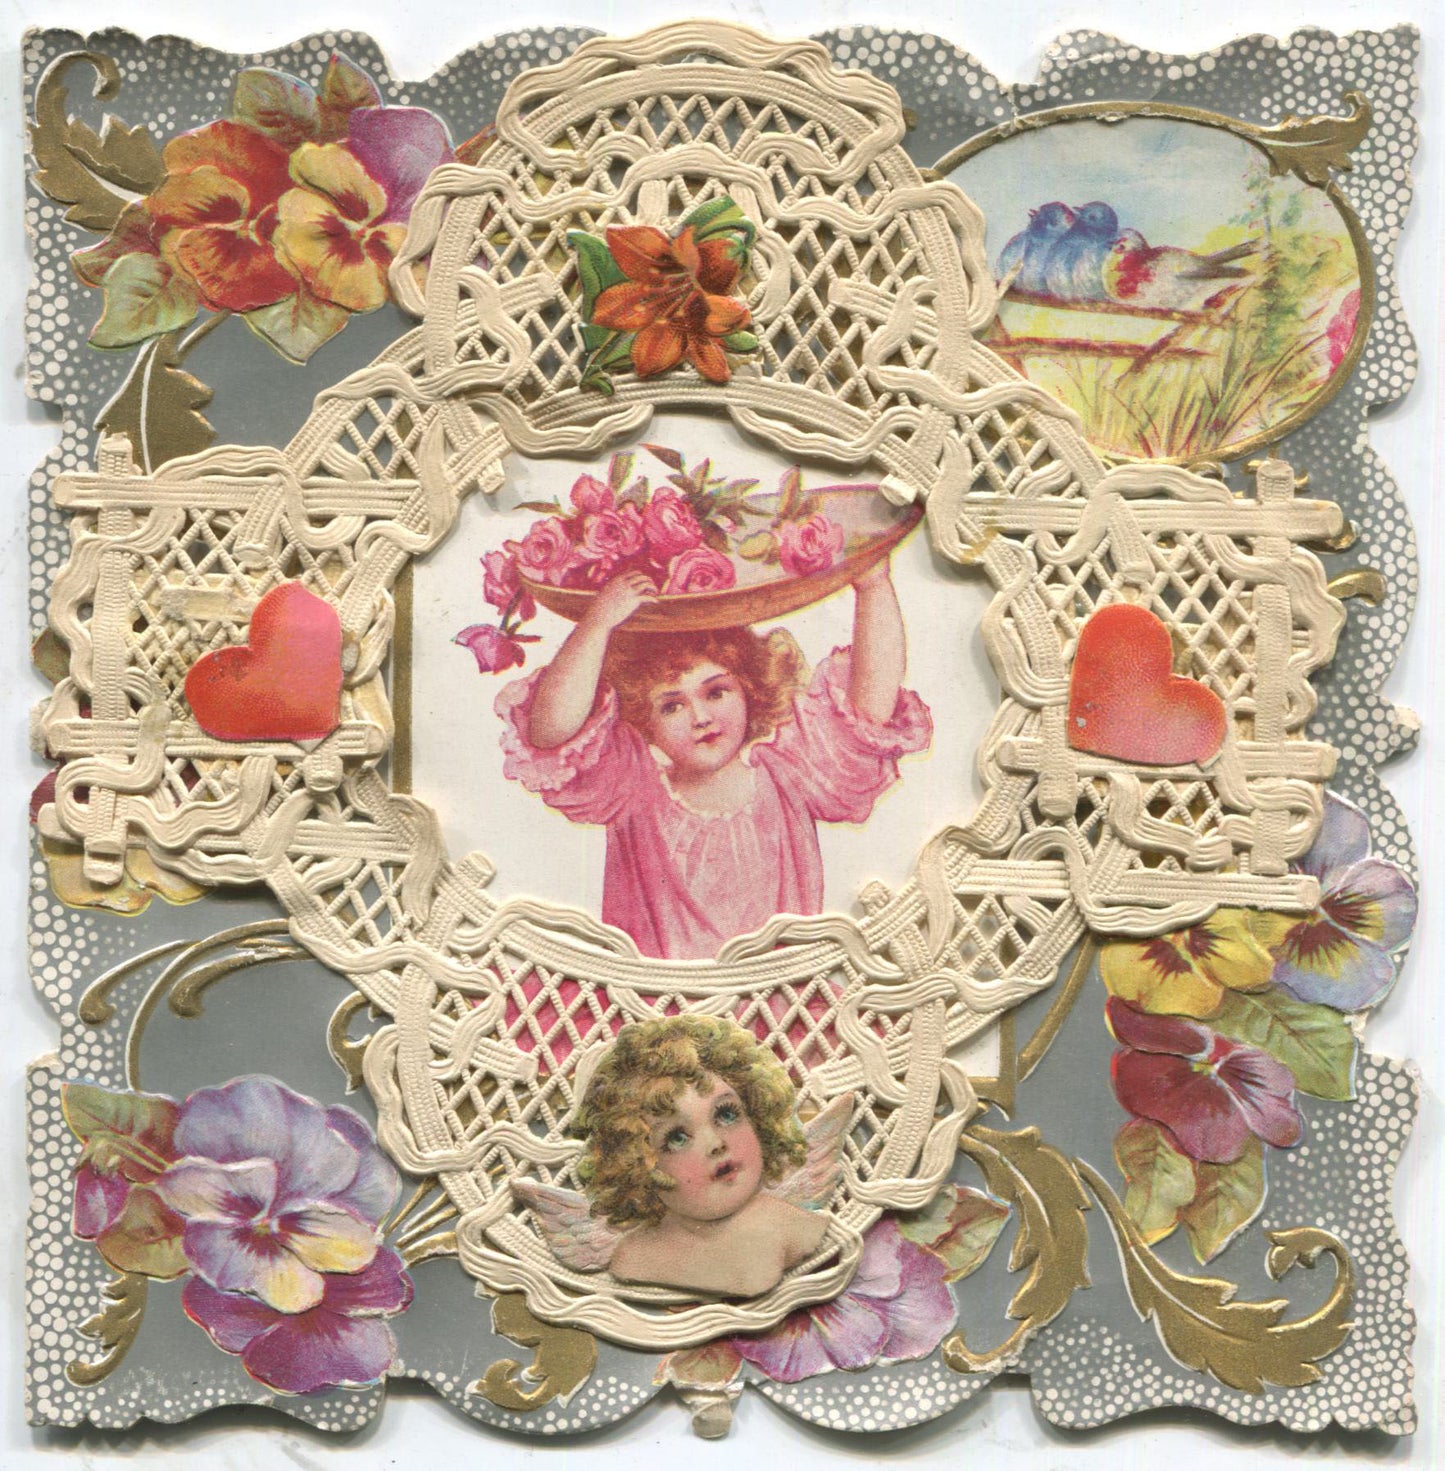 Paper Doily Antique Valentine Greeting Card, Dated 1907 - "All I Wish" - 5.5" x 5.5"